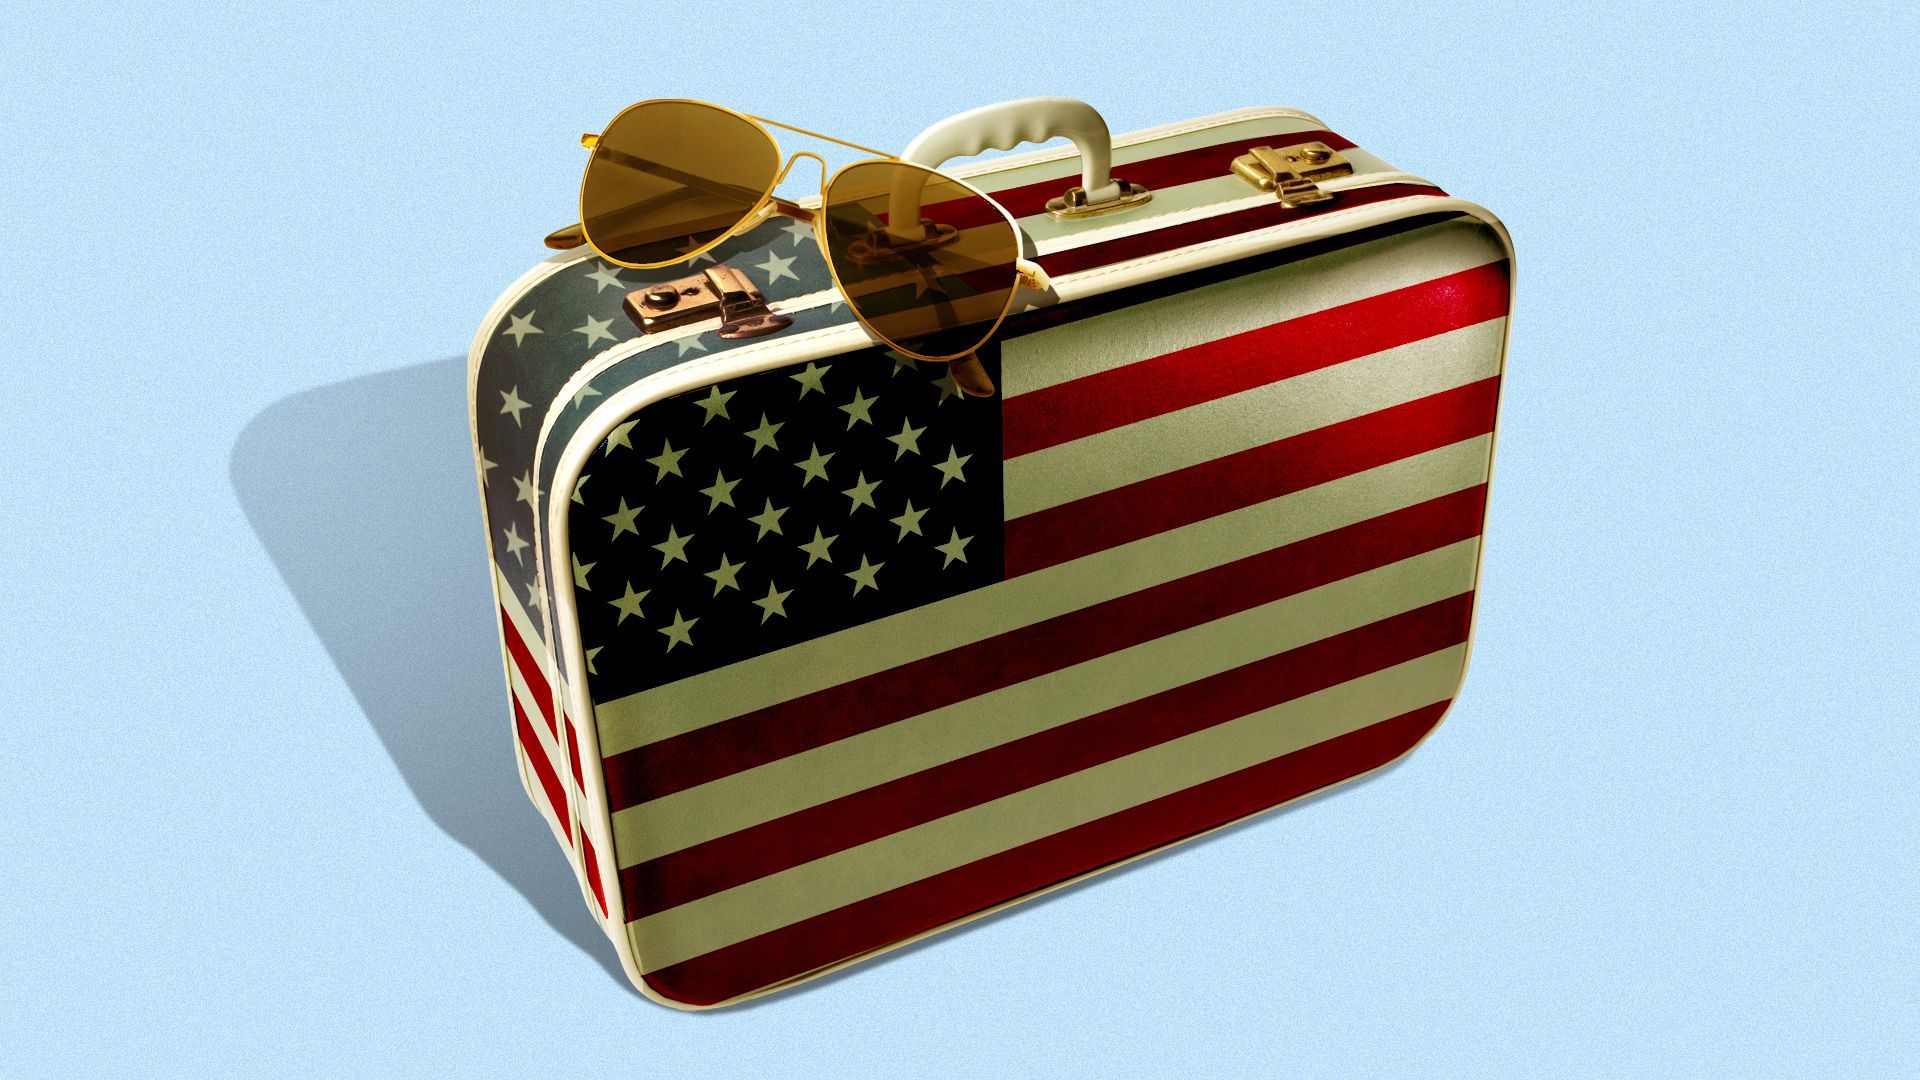 Illustration of a U.S. flag suitcase with a pair of aviator glasses on it